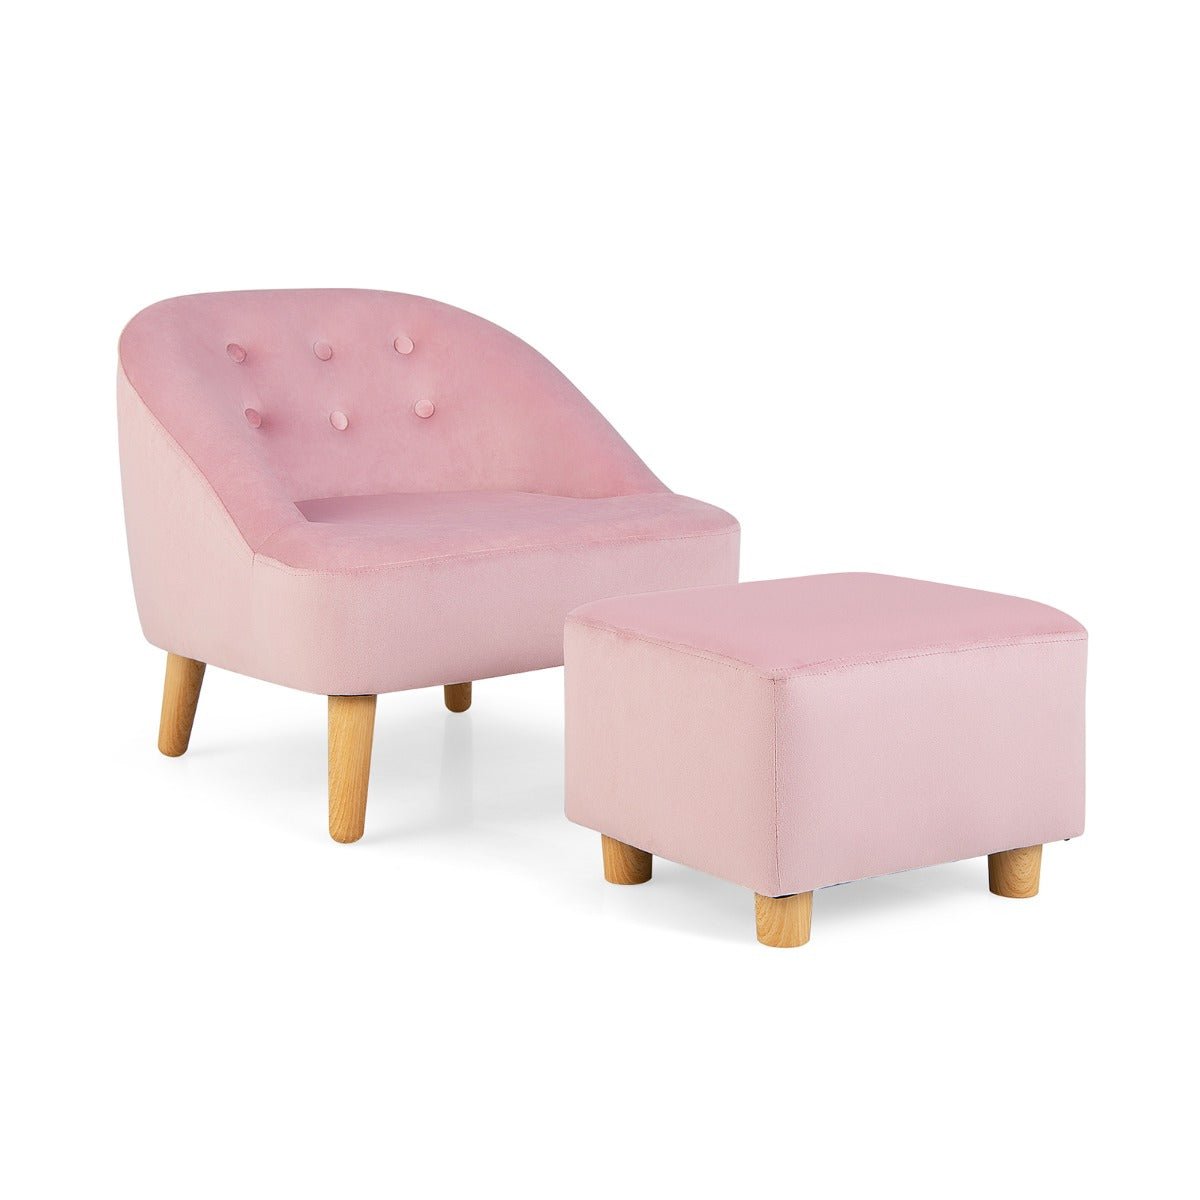 Pink Toddler Sofa Chair & Stool Set - Ages 3-5, Single Seating